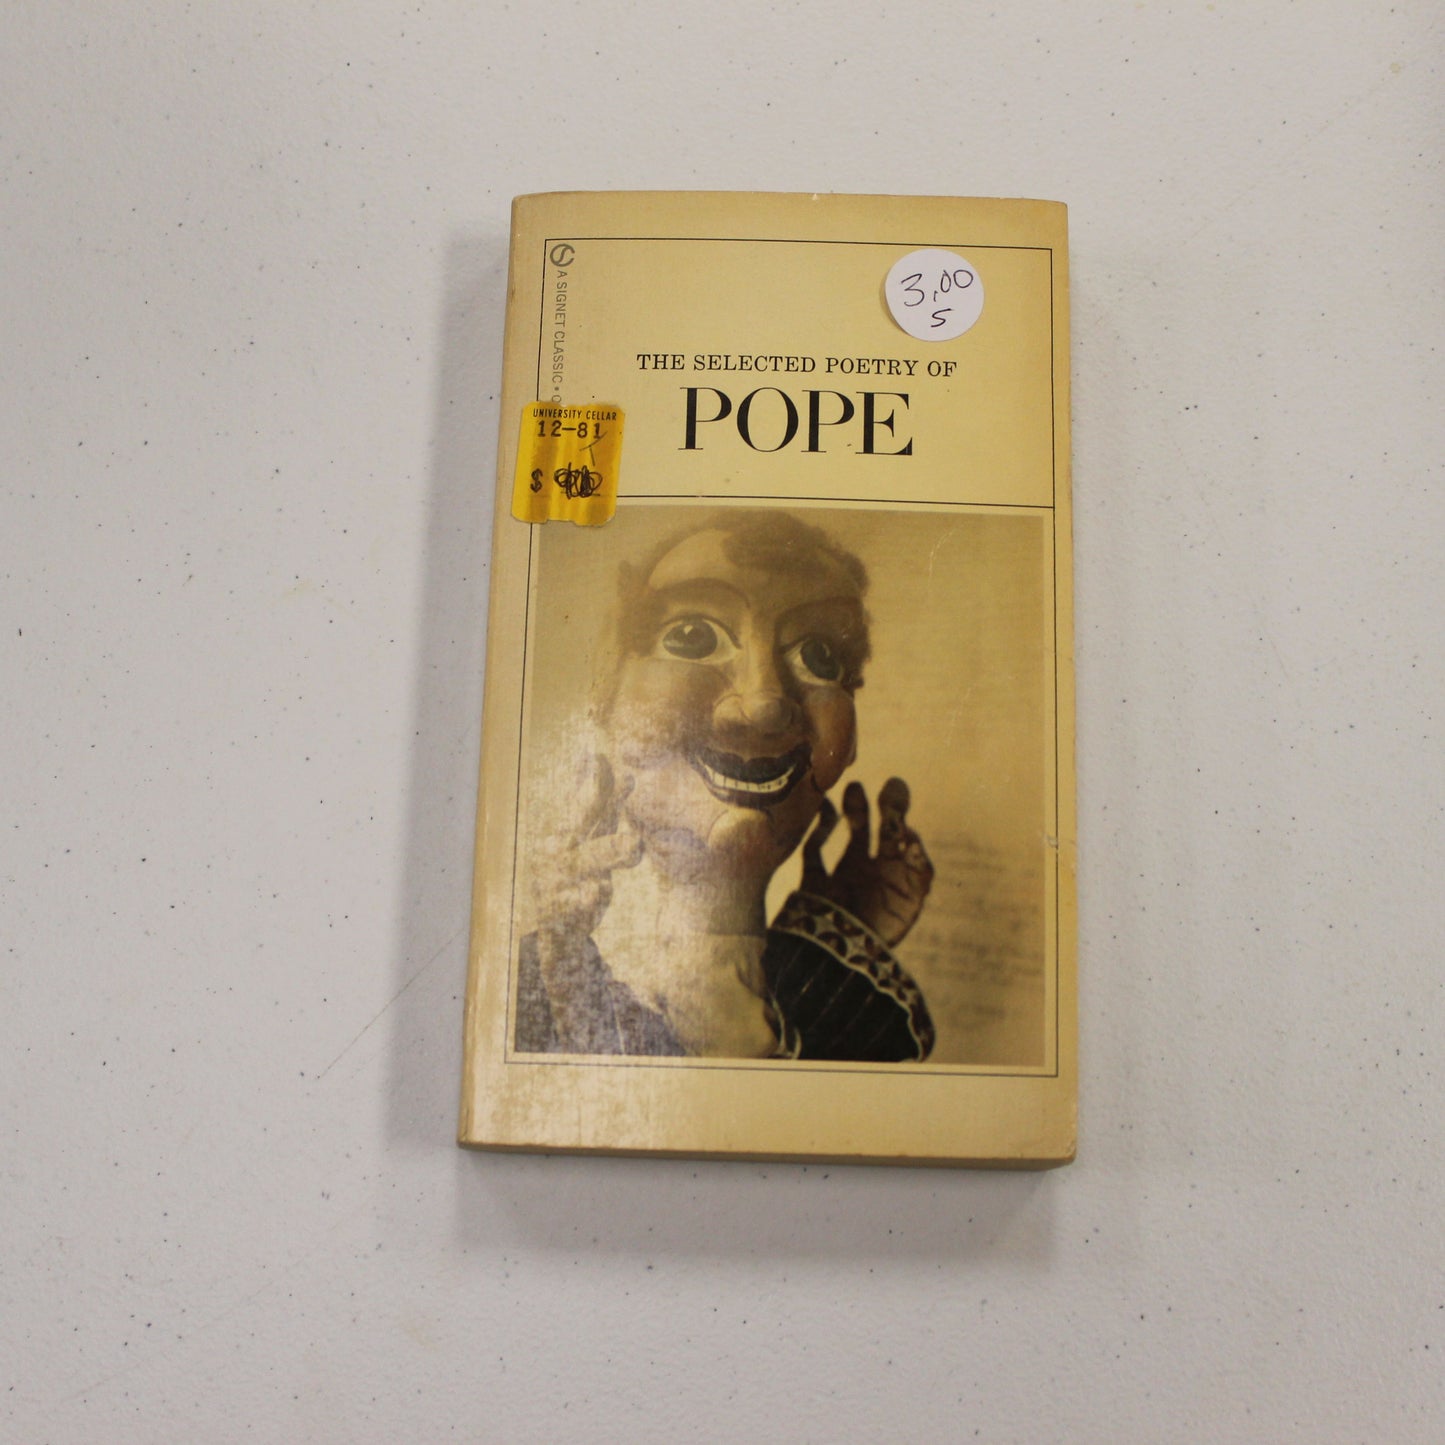 THE SELECTED POETRY OF POPE